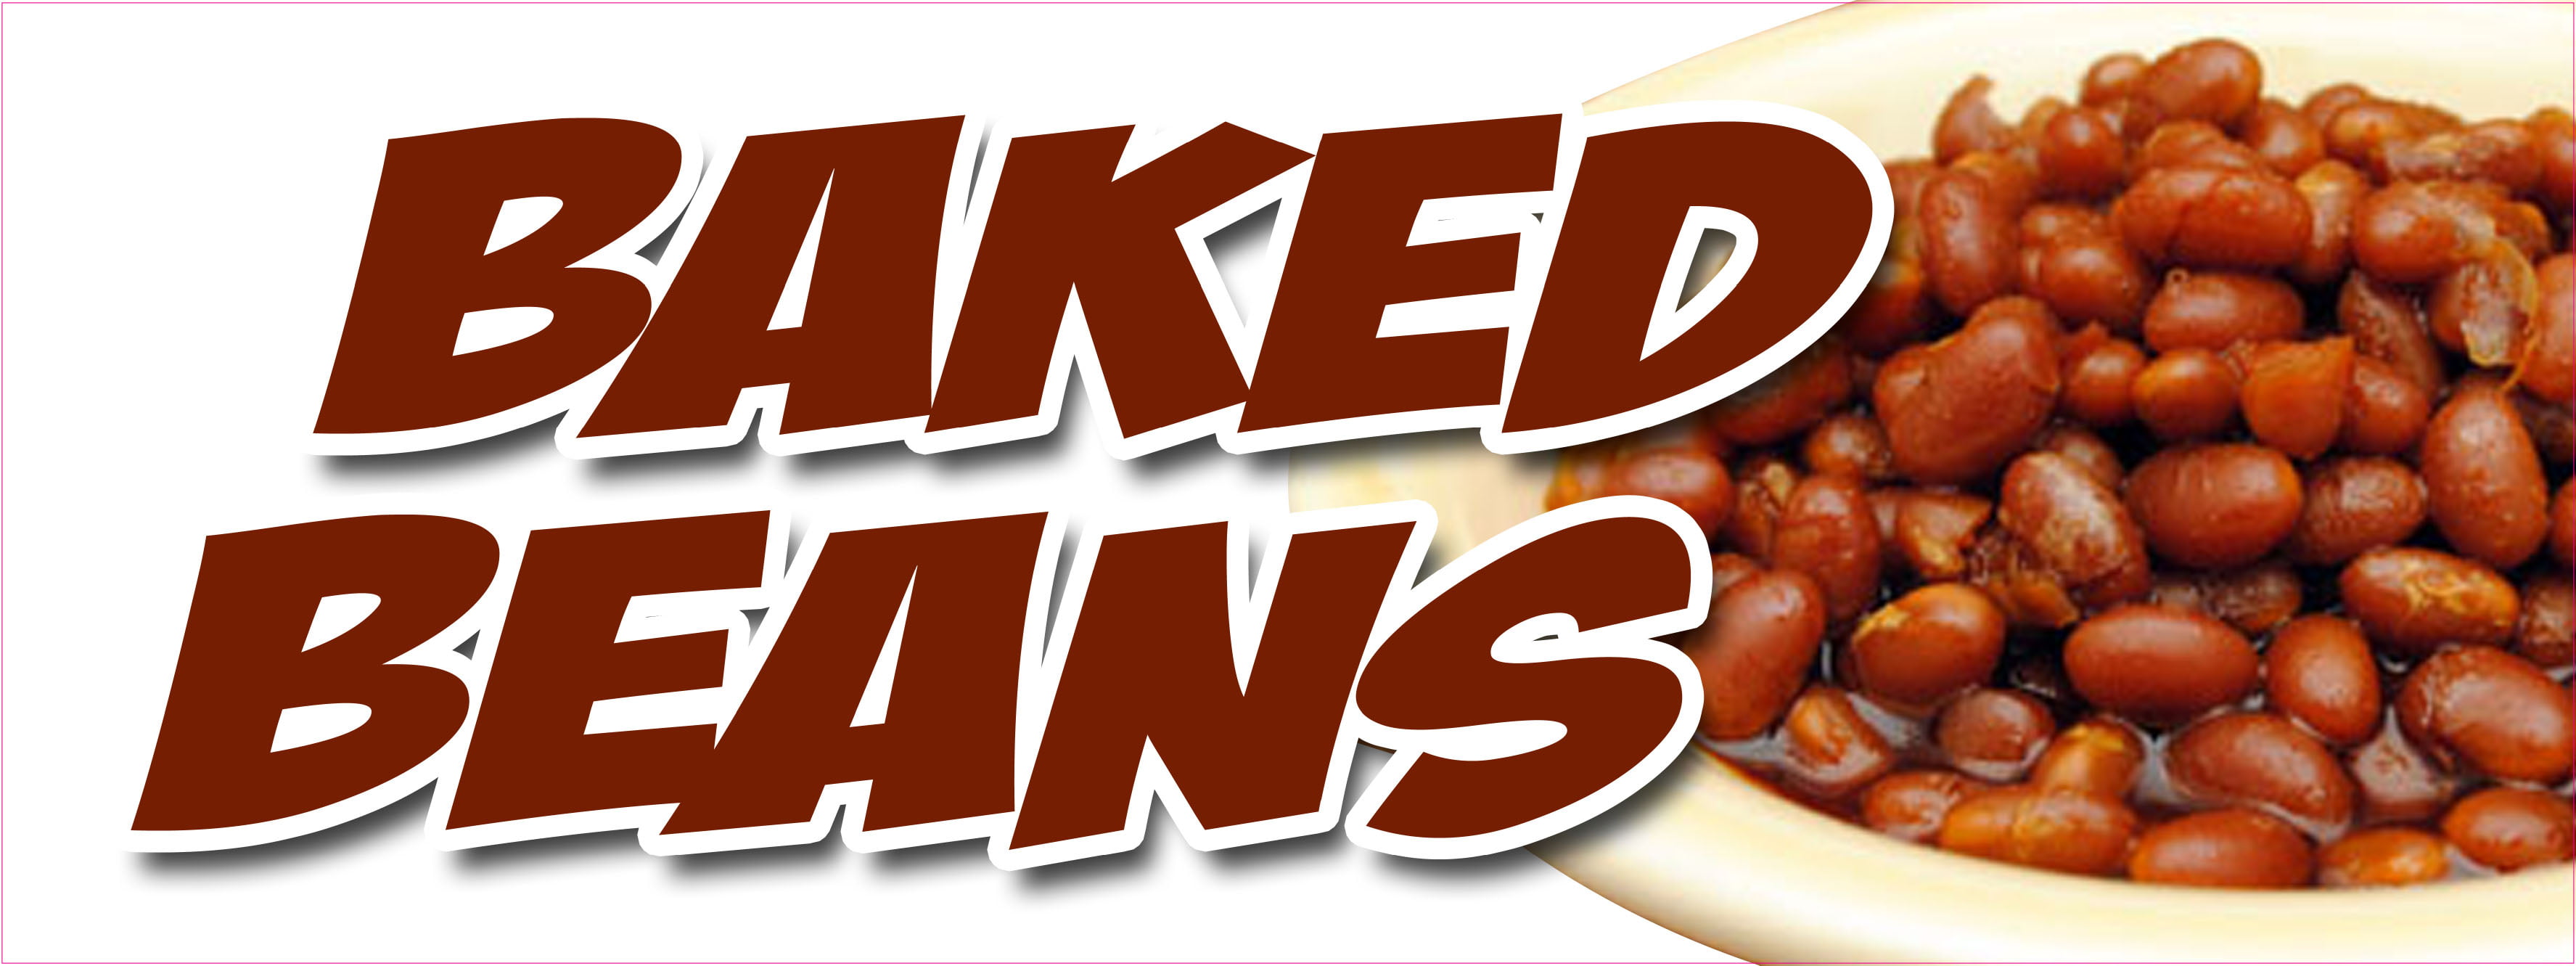 Baked Beans Decal Choose Your Size Food Truck Concession Vinyl Sticker 